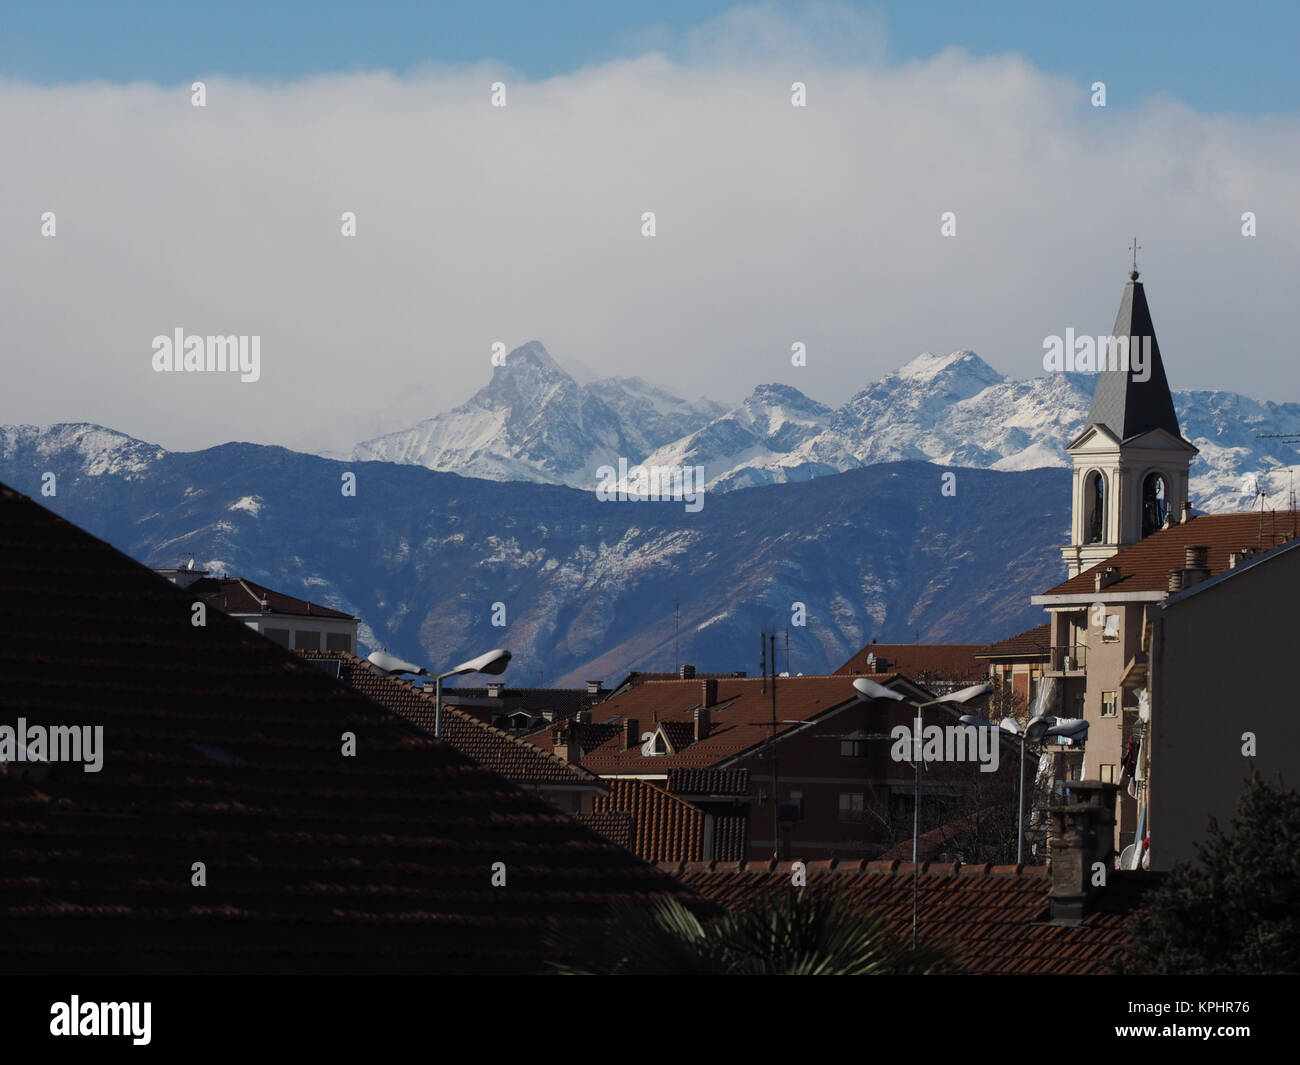 View of the city of Settimo Torinese, Italy with steeple of St Peter in Chains church and the Alps mountains Stock Photo